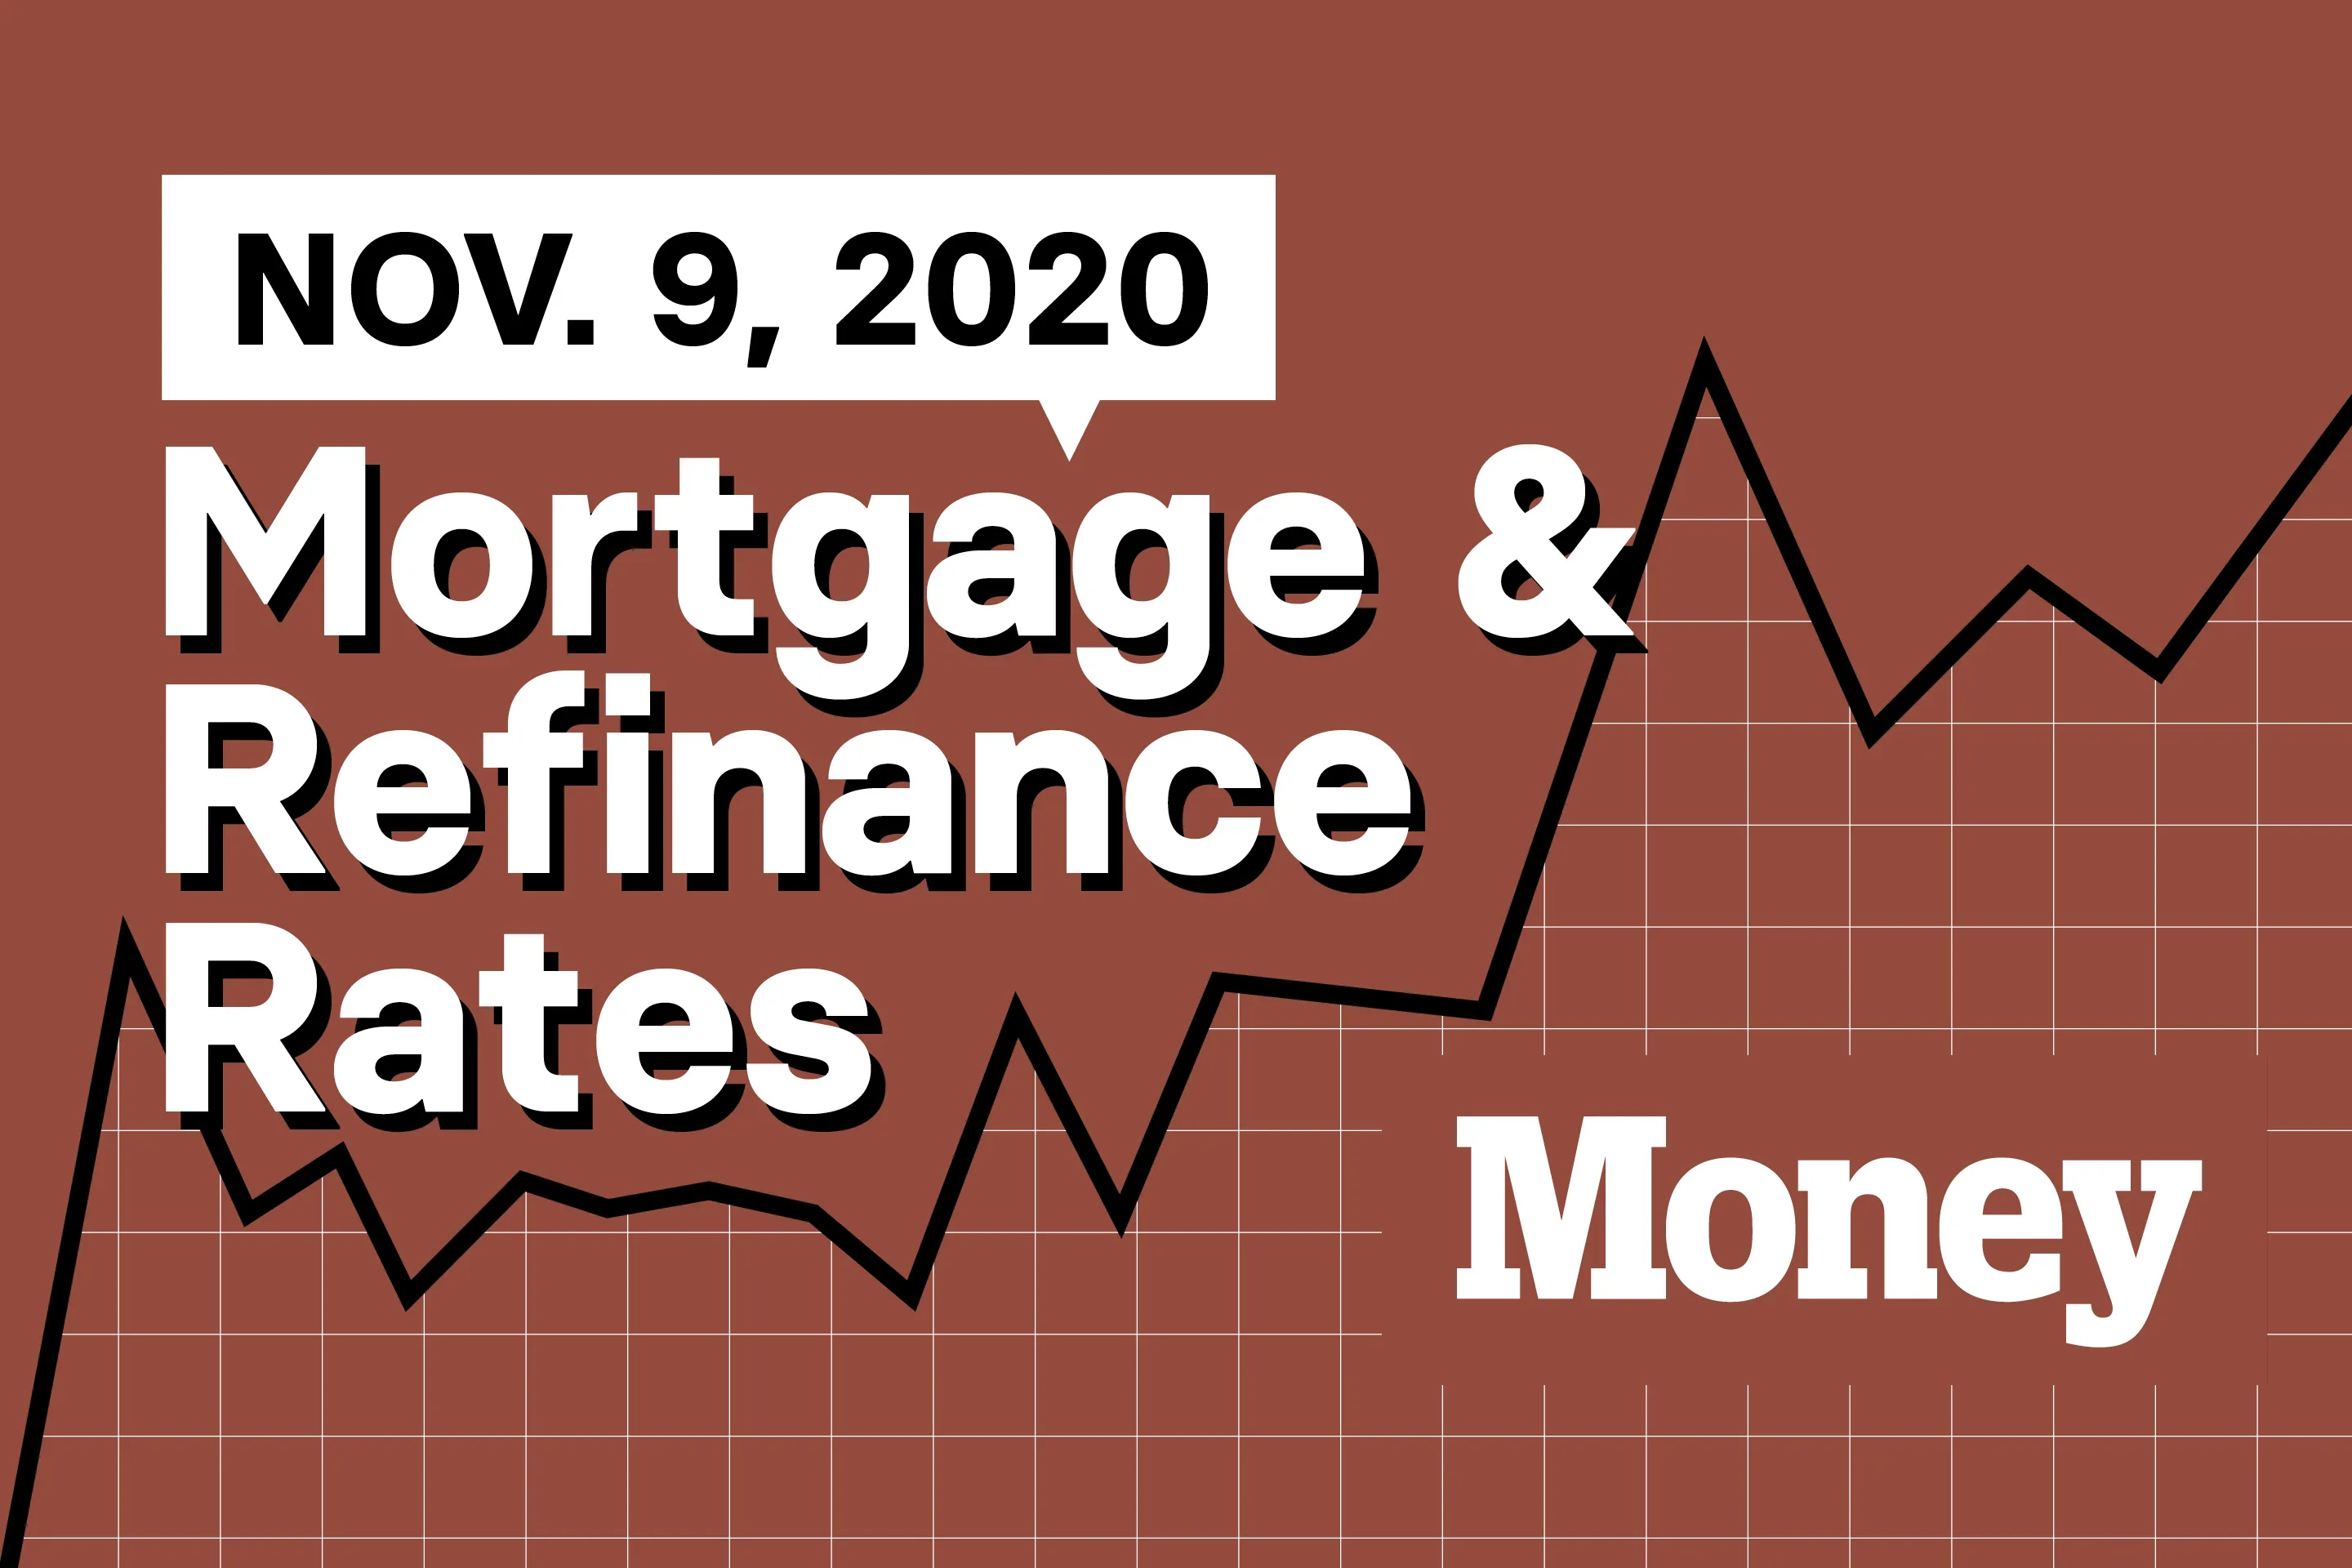 Here Are Today's Best Mortgage & Refinance Rates for November 9, 2020